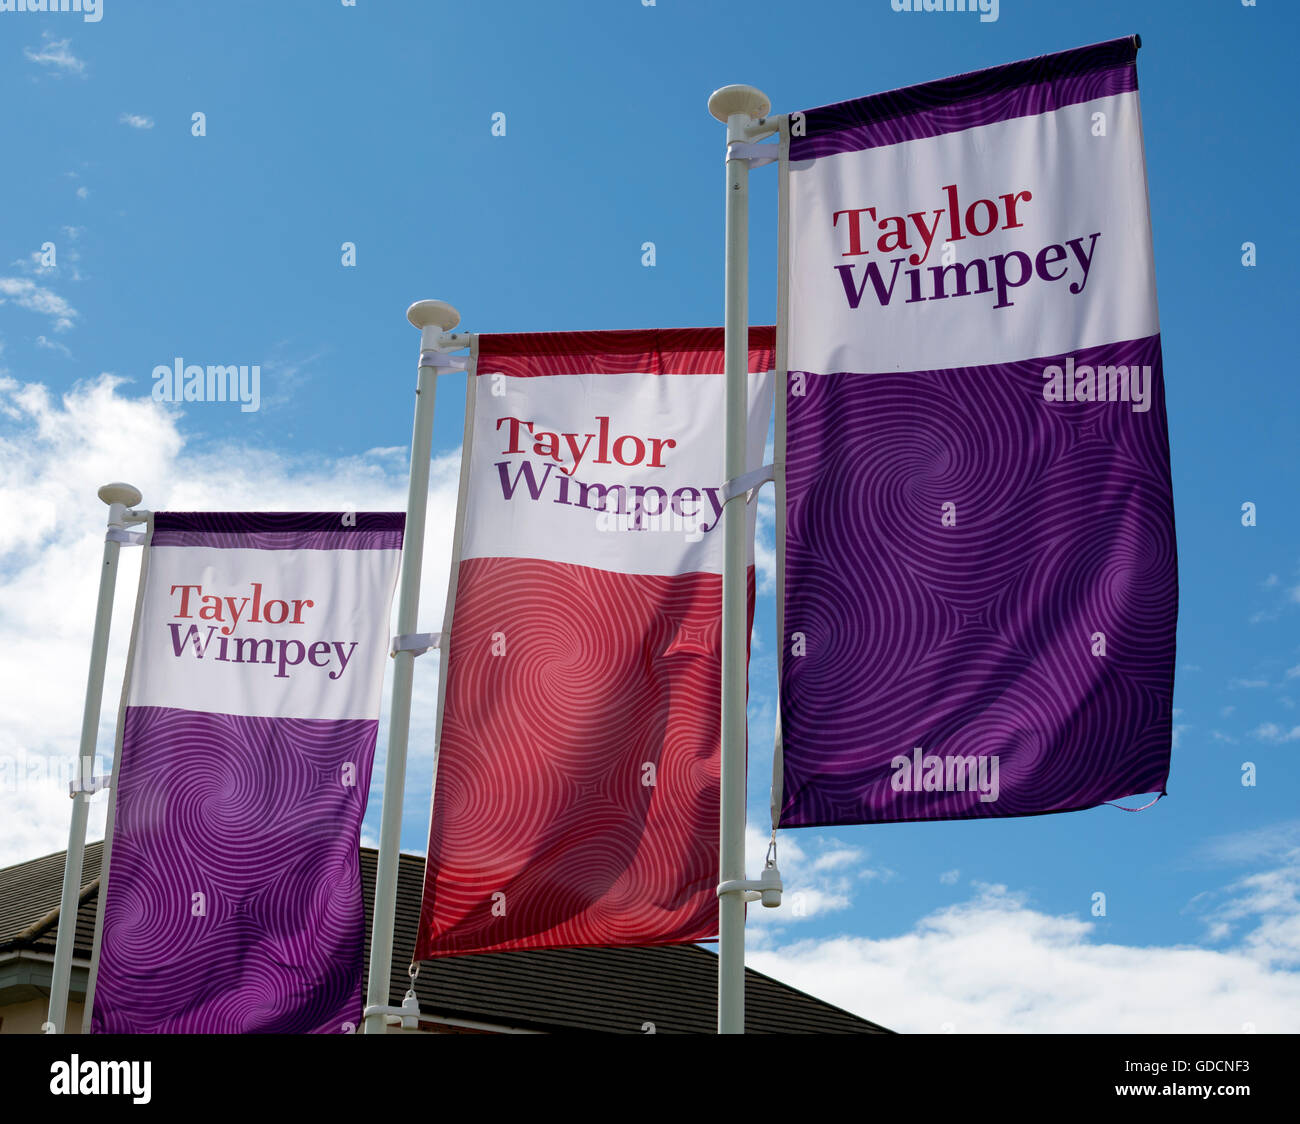 Taylor Wimpey bandiere Foto Stock